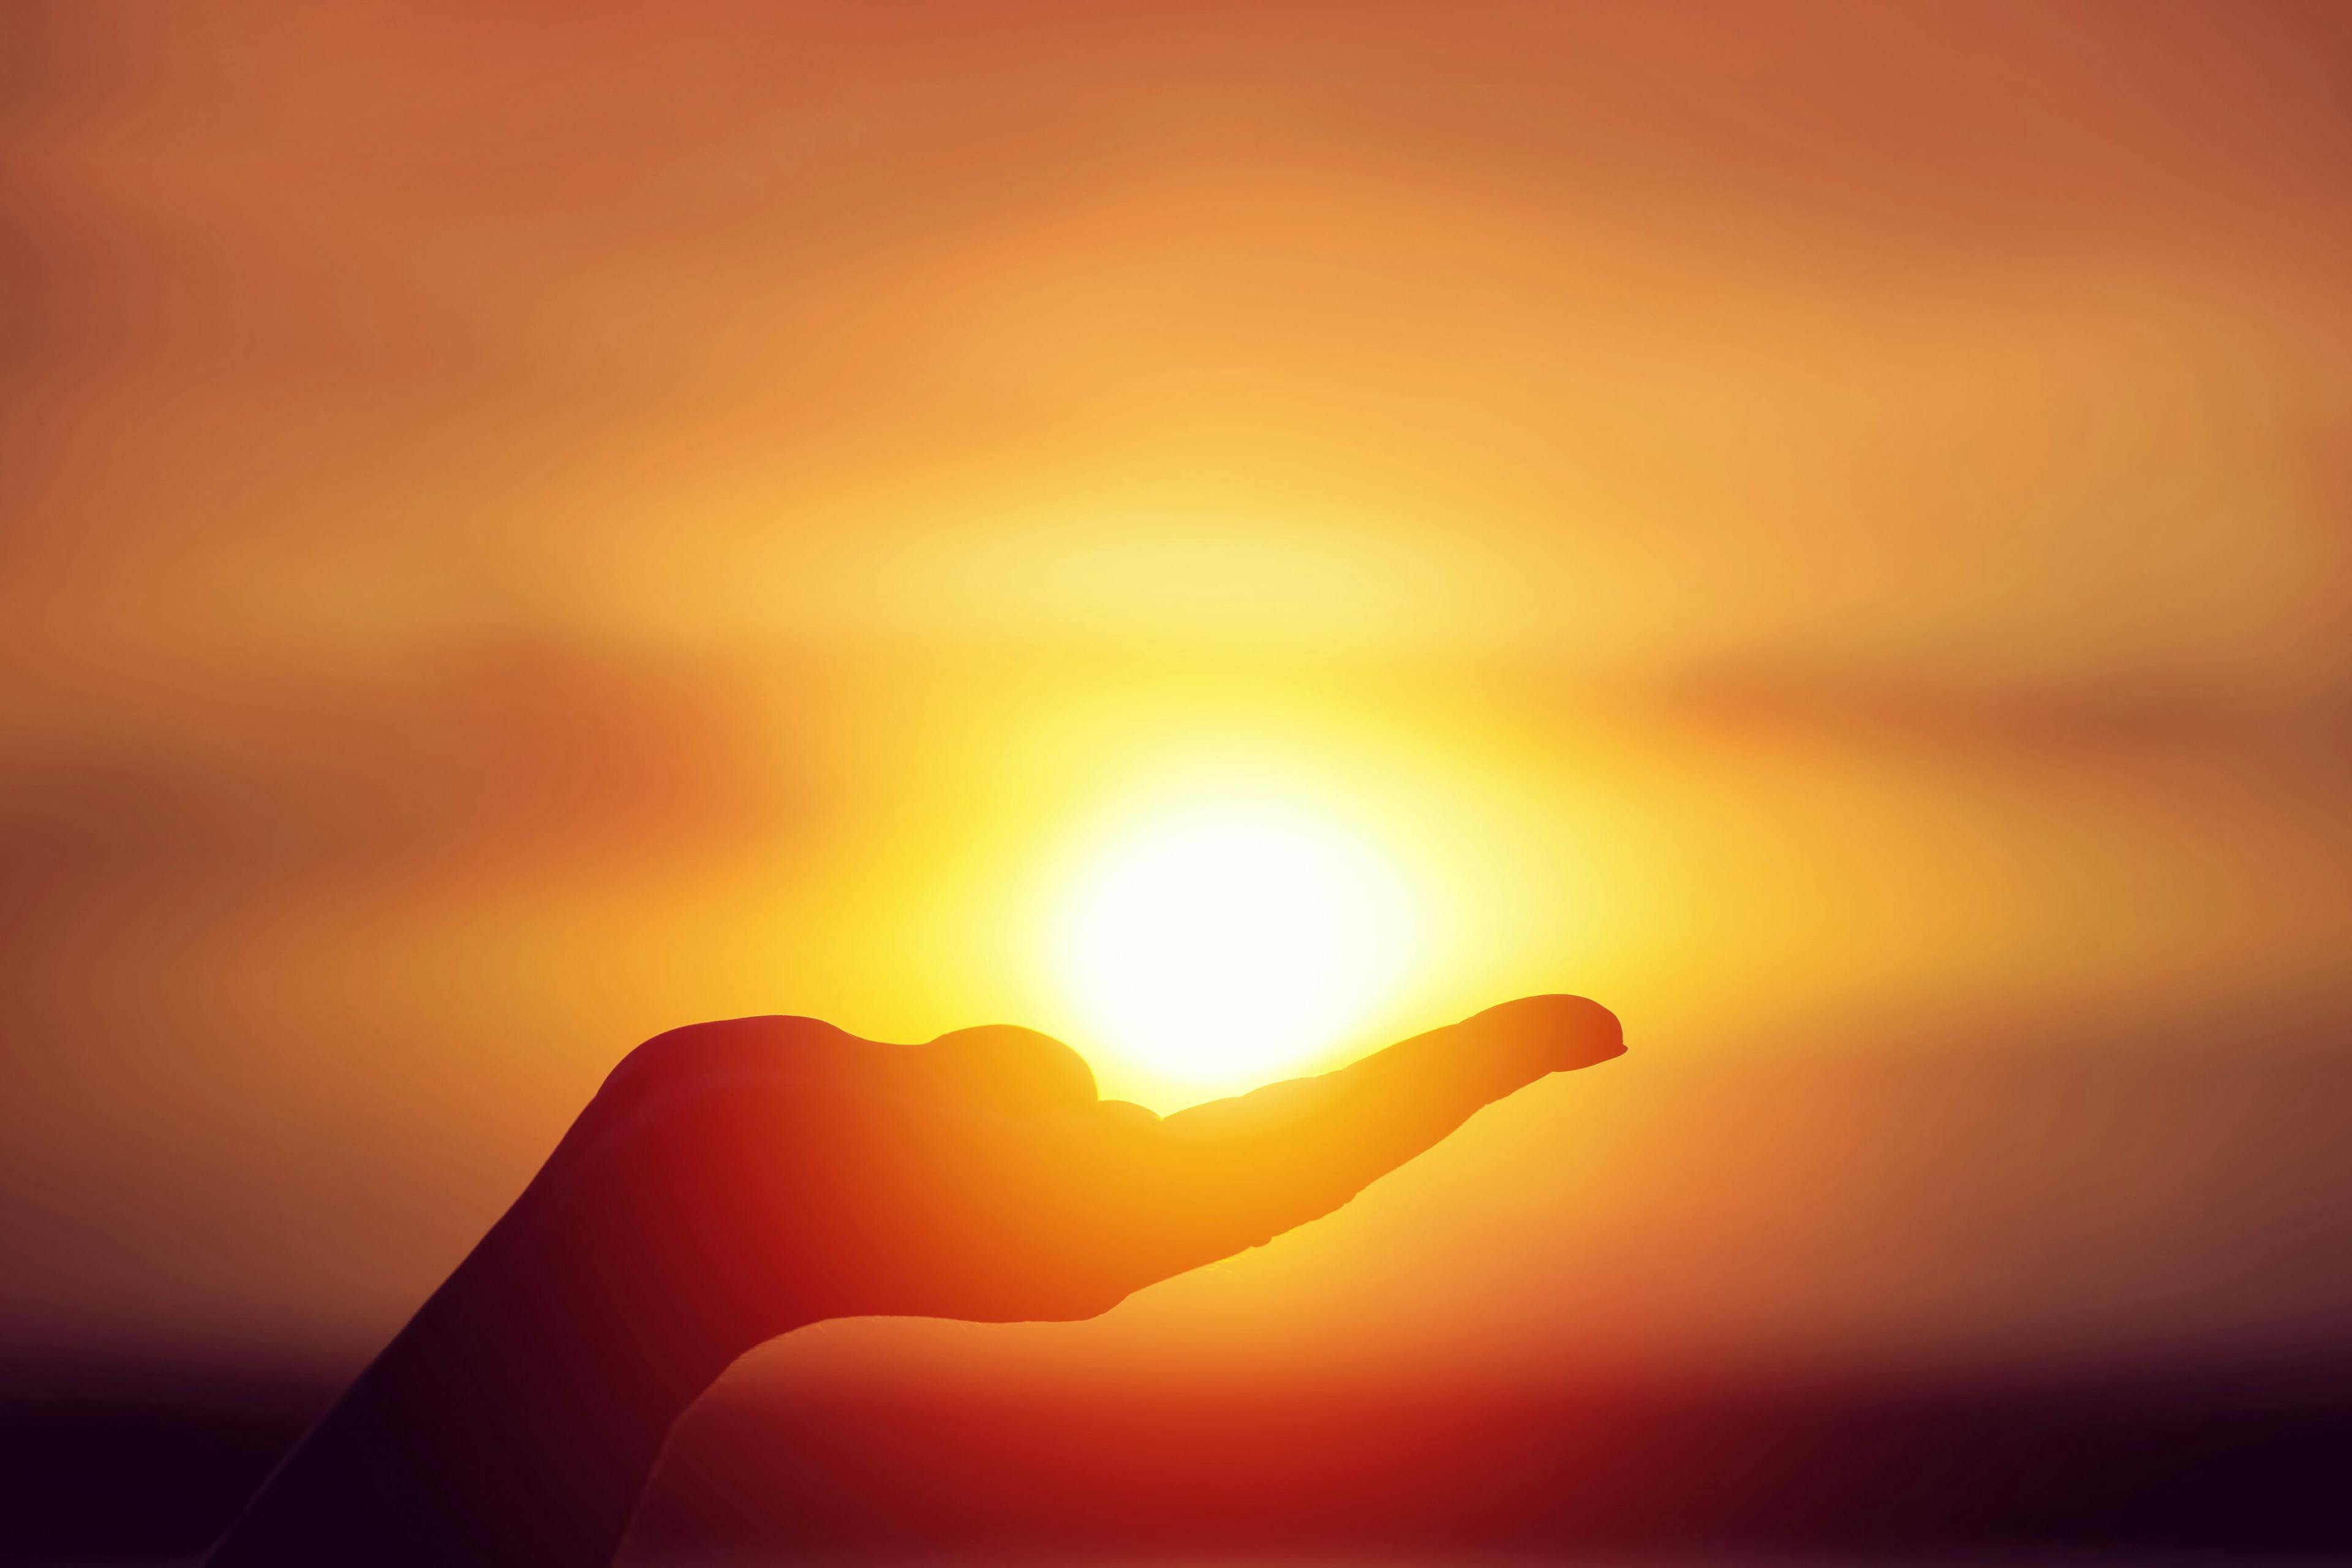 How can working with patients help us navigate the sunrises and sunsets of our own lives?